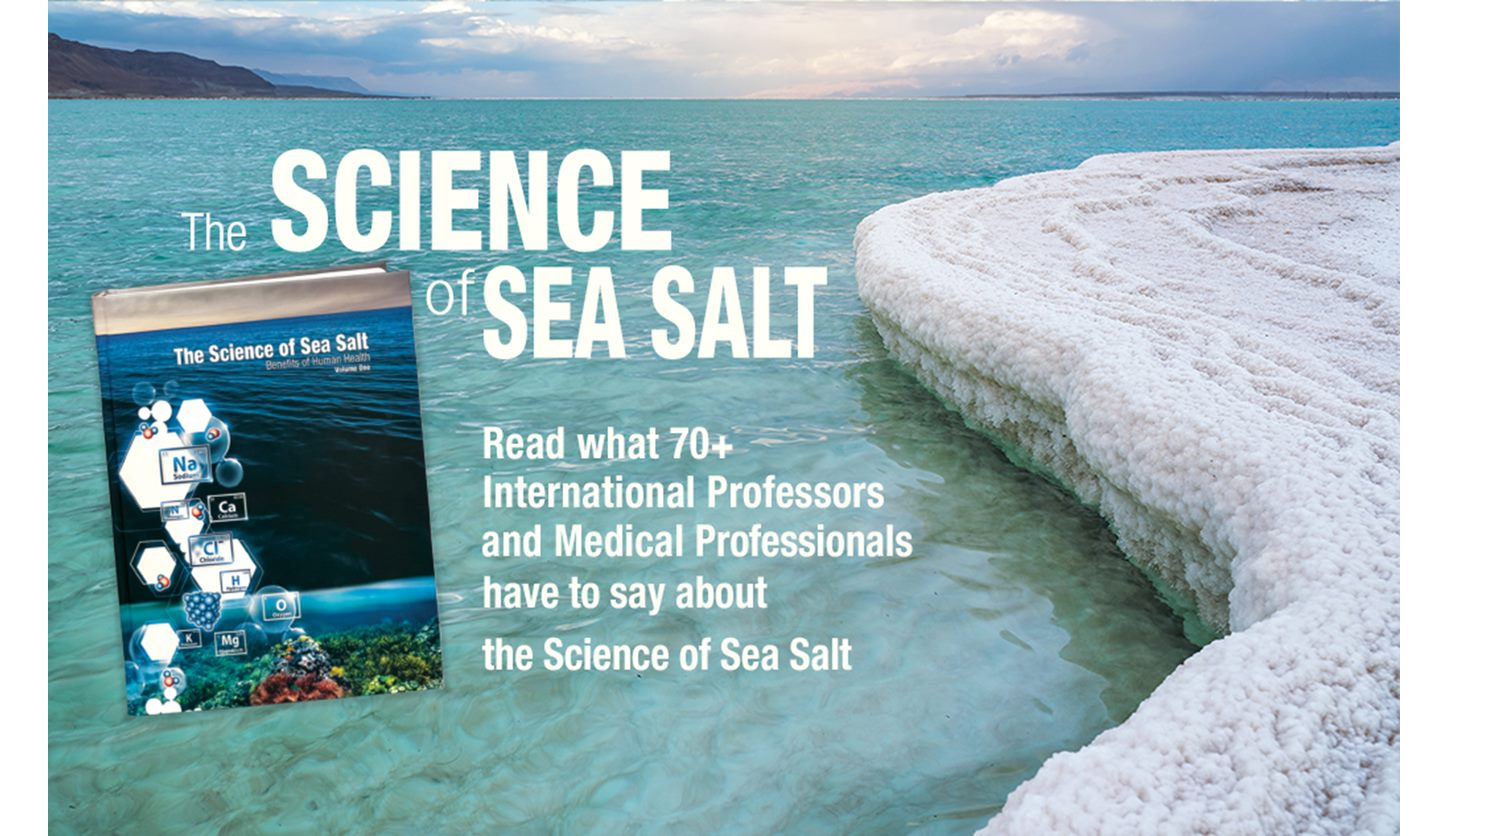 Research-Based Book Shows How To Use Sea Salt To Manage Diabetes Symptoms